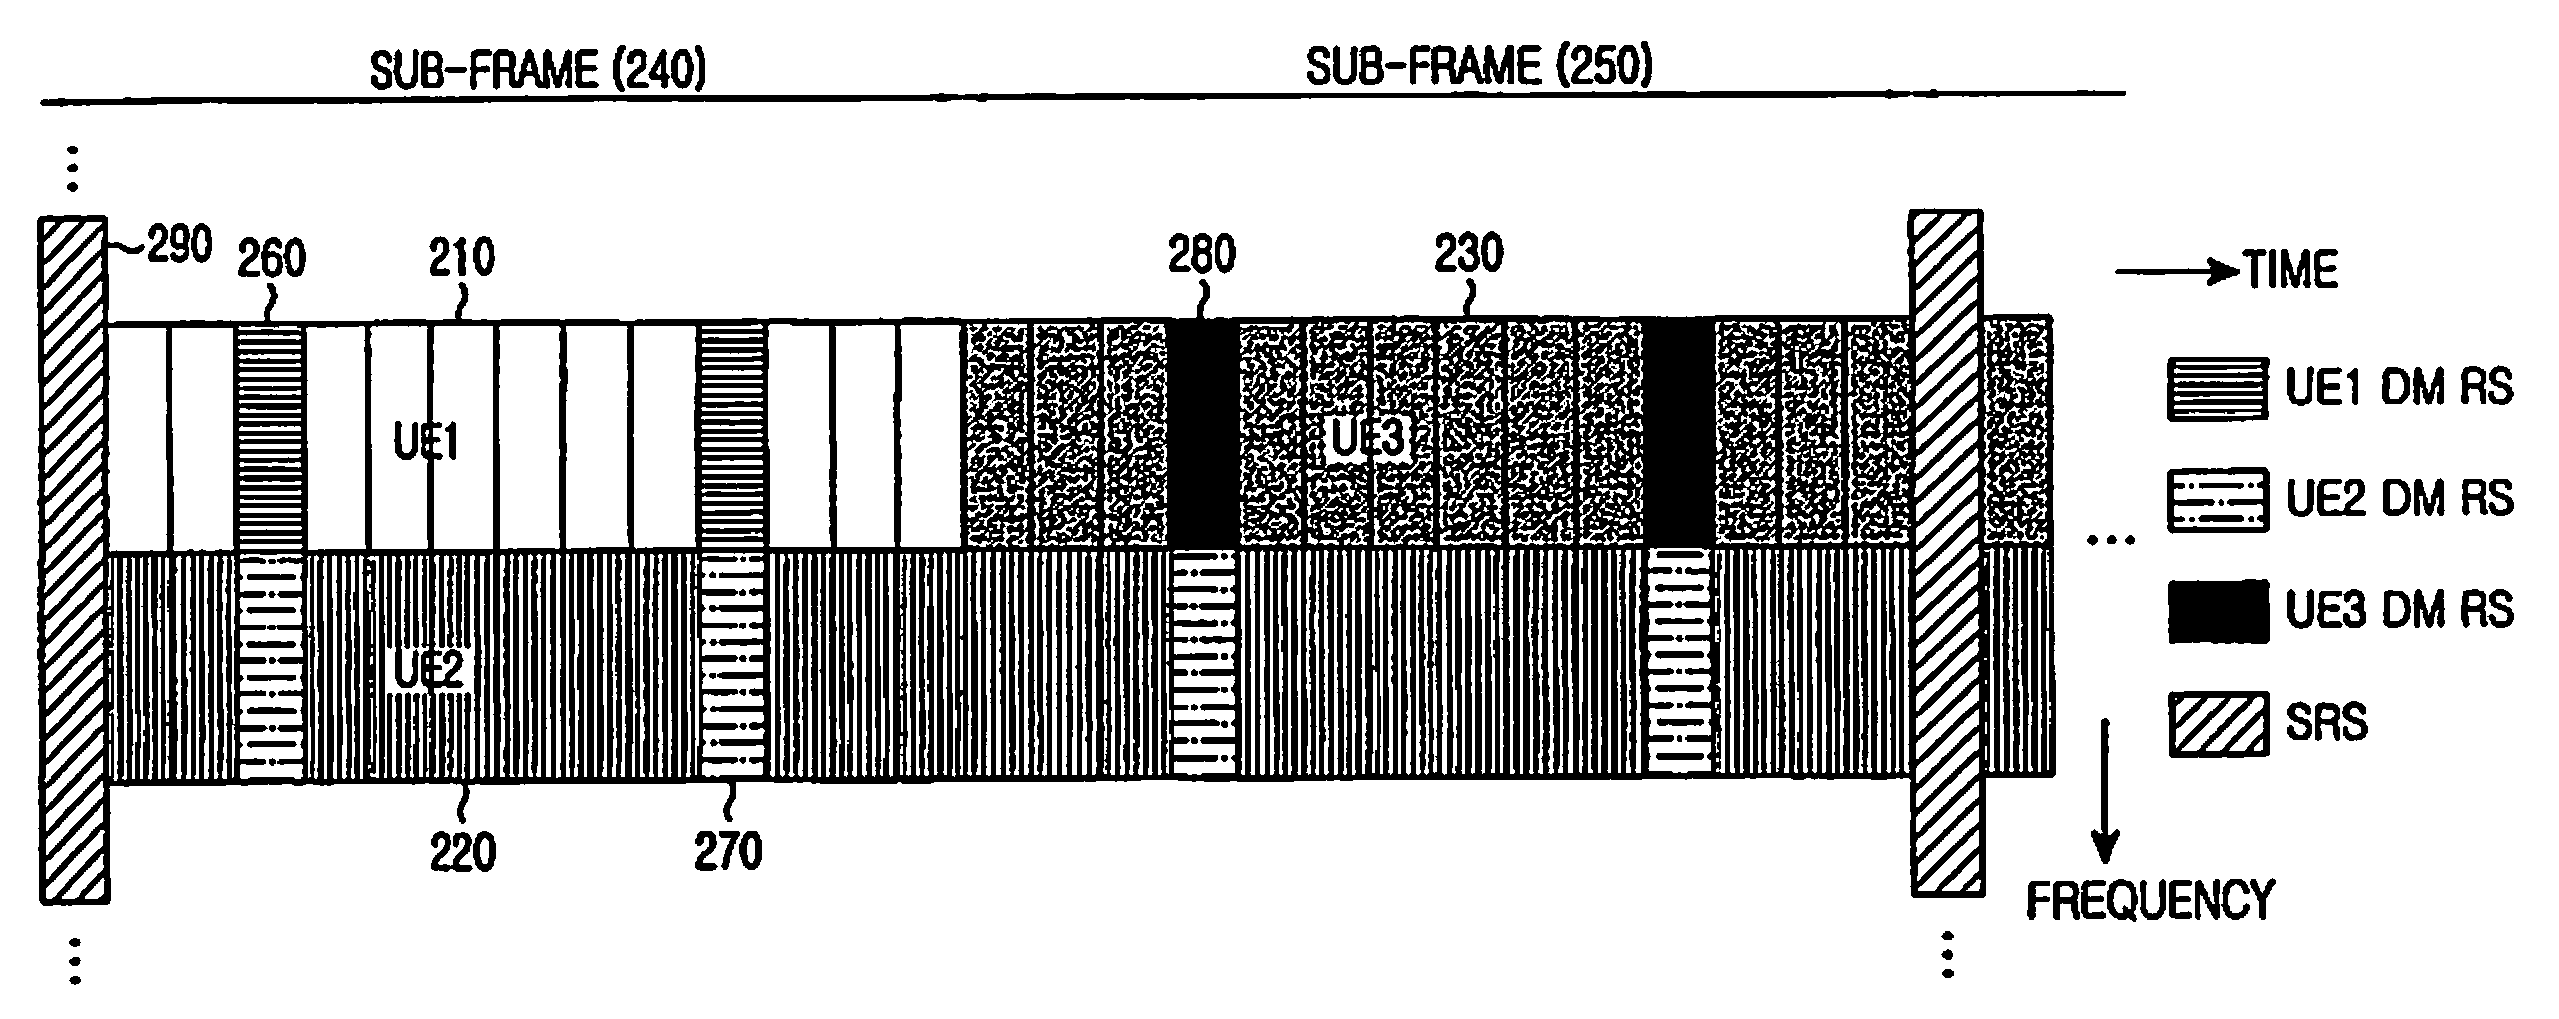 Method and apparatus for transmitting and receiving different signal types in communication systems